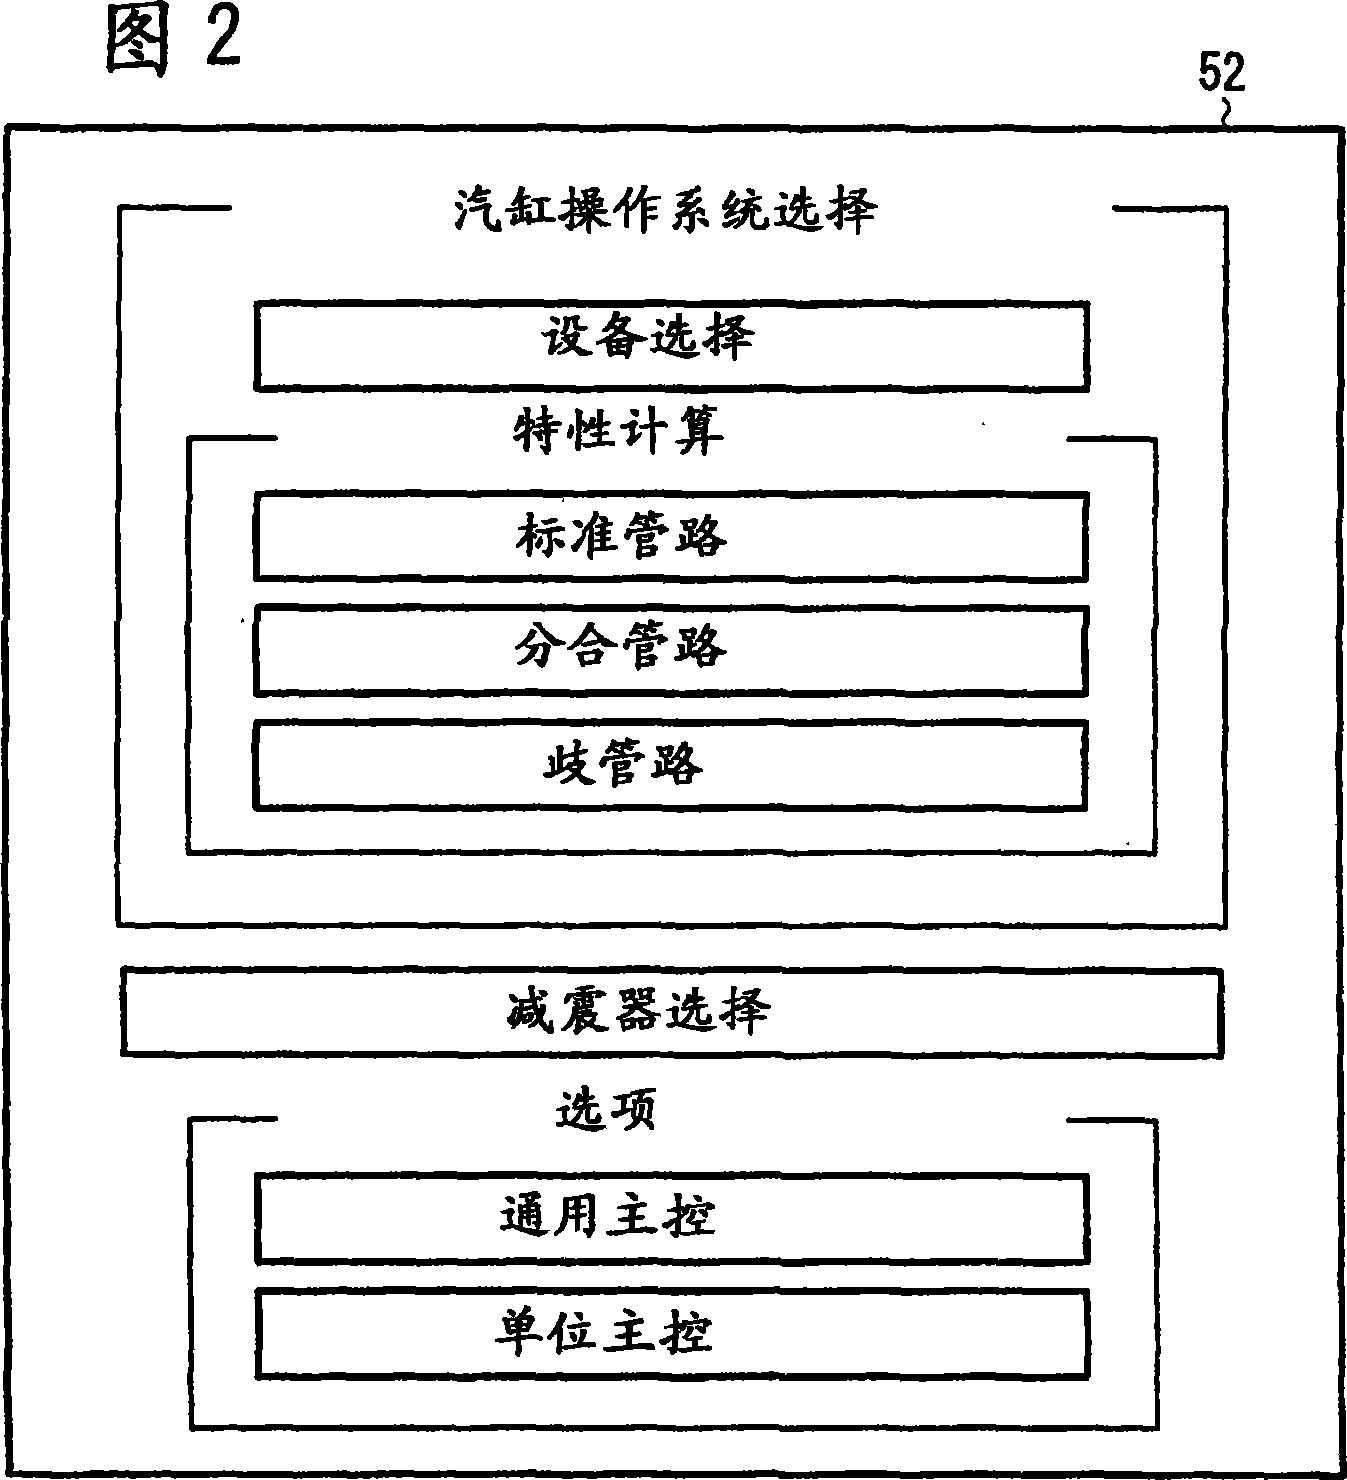 Pneumatic device selection system, pneumatic device selection method, recording medium, and pneumatic device selection program